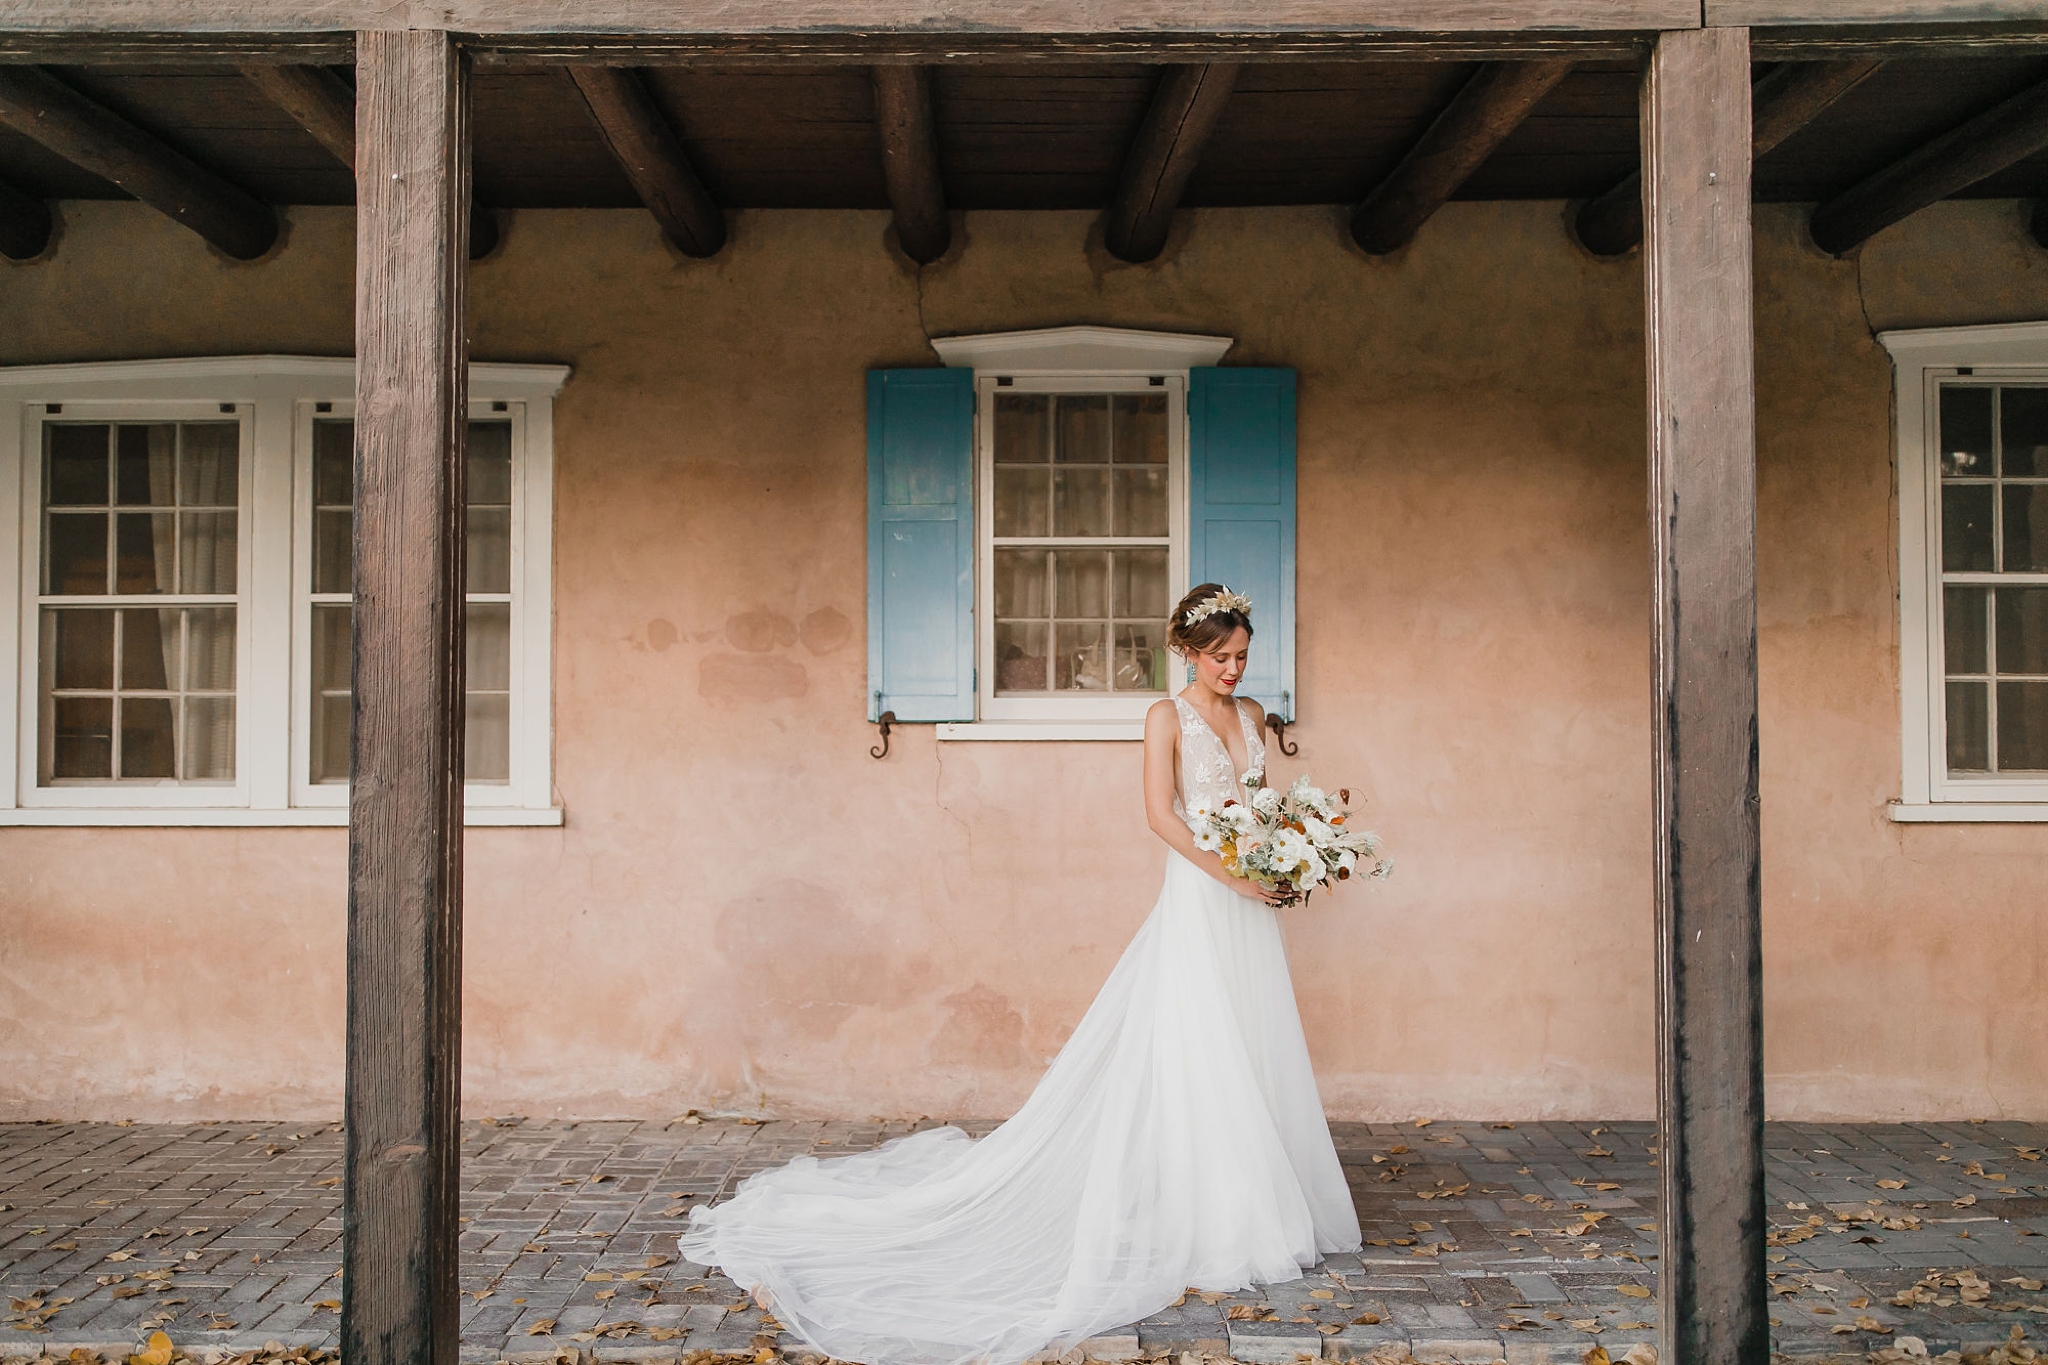 Alicia+lucia+photography+-+albuquerque+wedding+photographer+-+santa+fe+wedding+photography+-+new+mexico+wedding+photographer+-+new+mexico+wedding+-+wedding+gowns+-+bridal+gowns+-+a+line+wedding+gown_0001.jpg